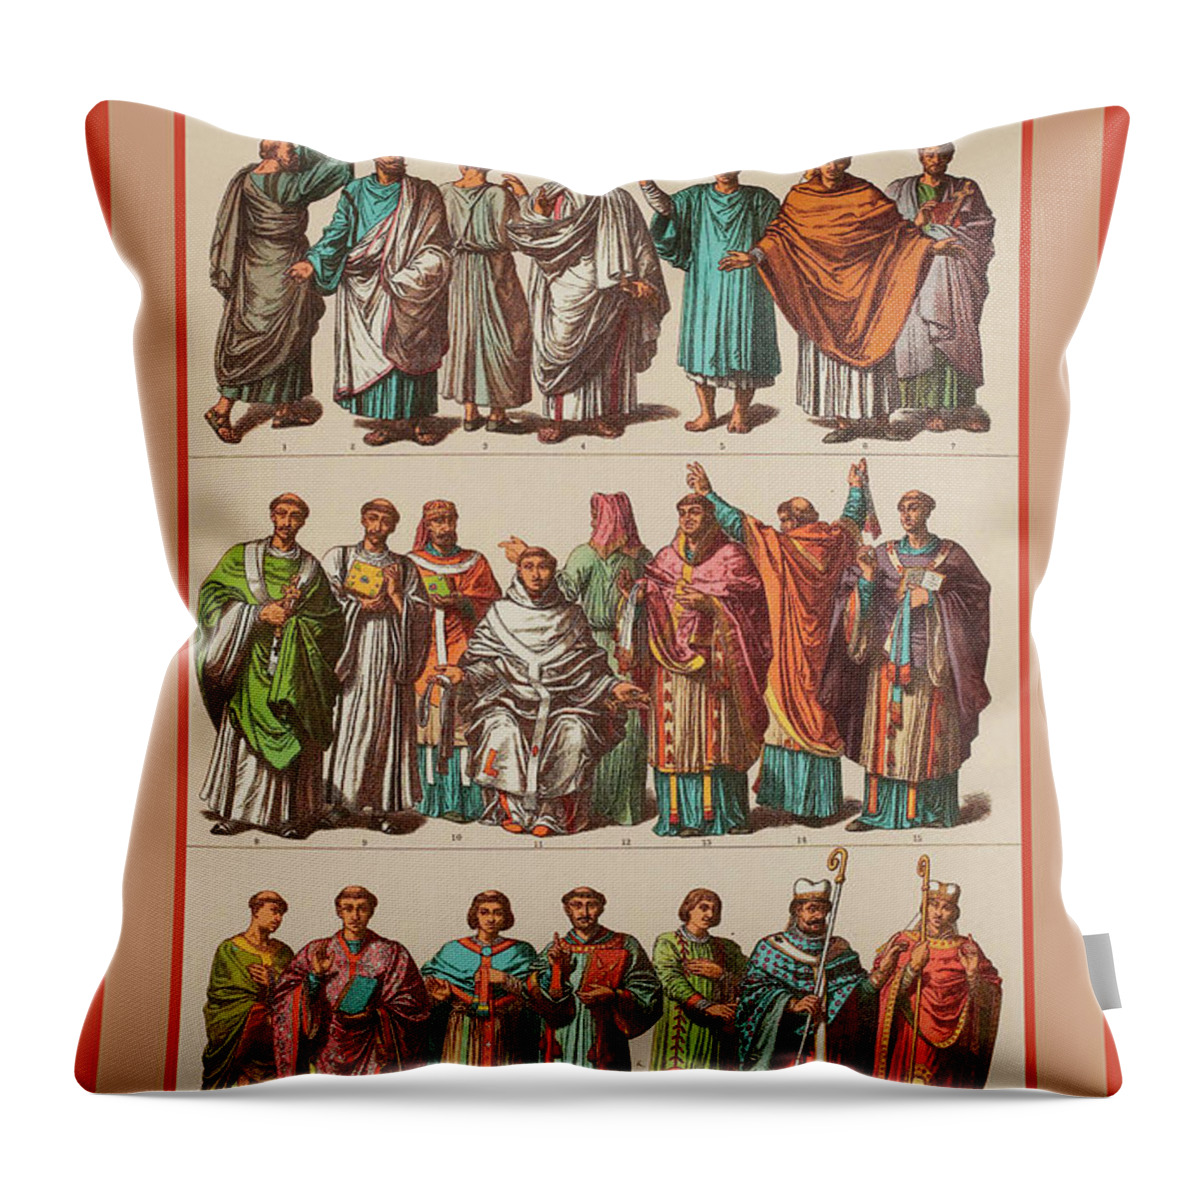 Europe Throw Pillow featuring the painting Roman Catholic Church Costume by Friedrich Hottenroth